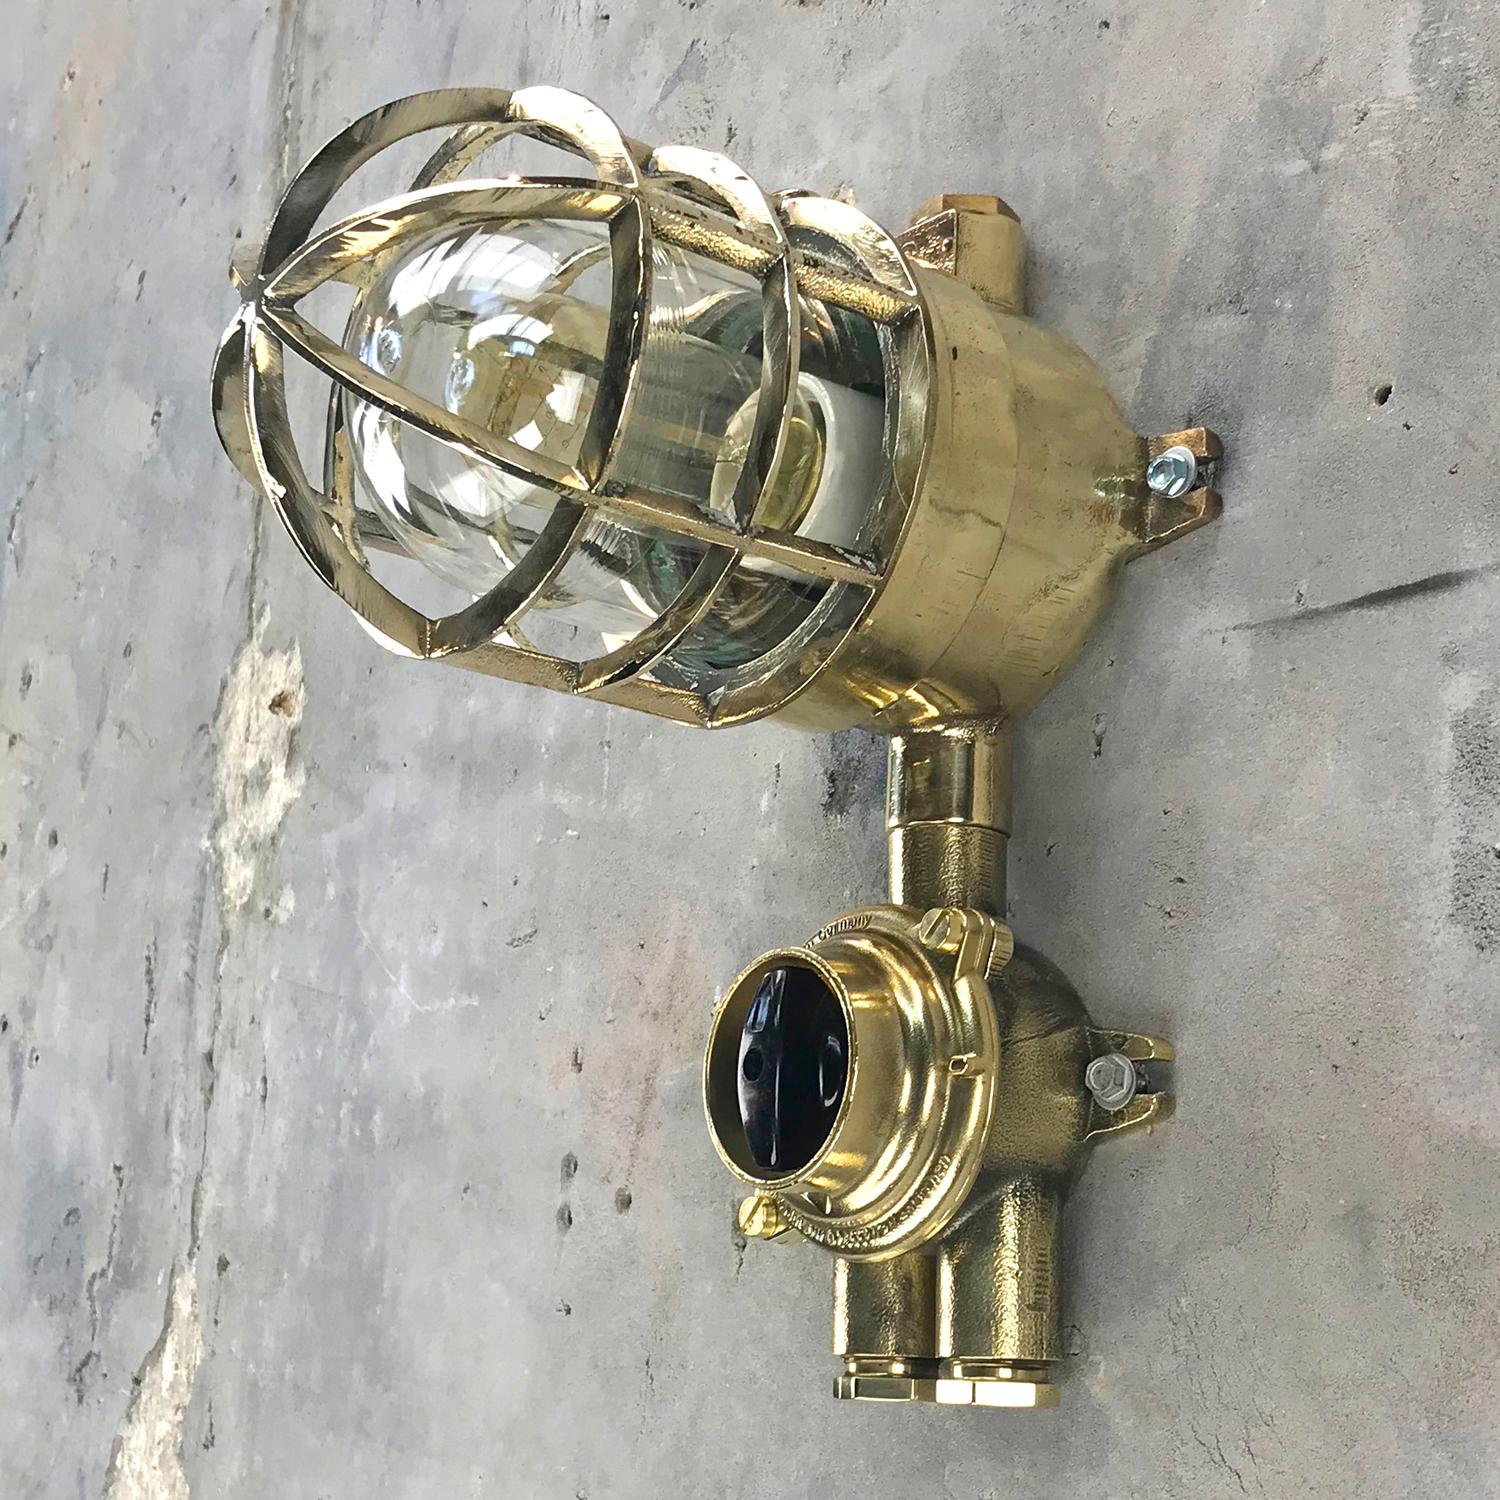 Industrial 1970s German Explosion Proof Wall Light Cast Brass, Glass Shade & Rotary Switch For Sale